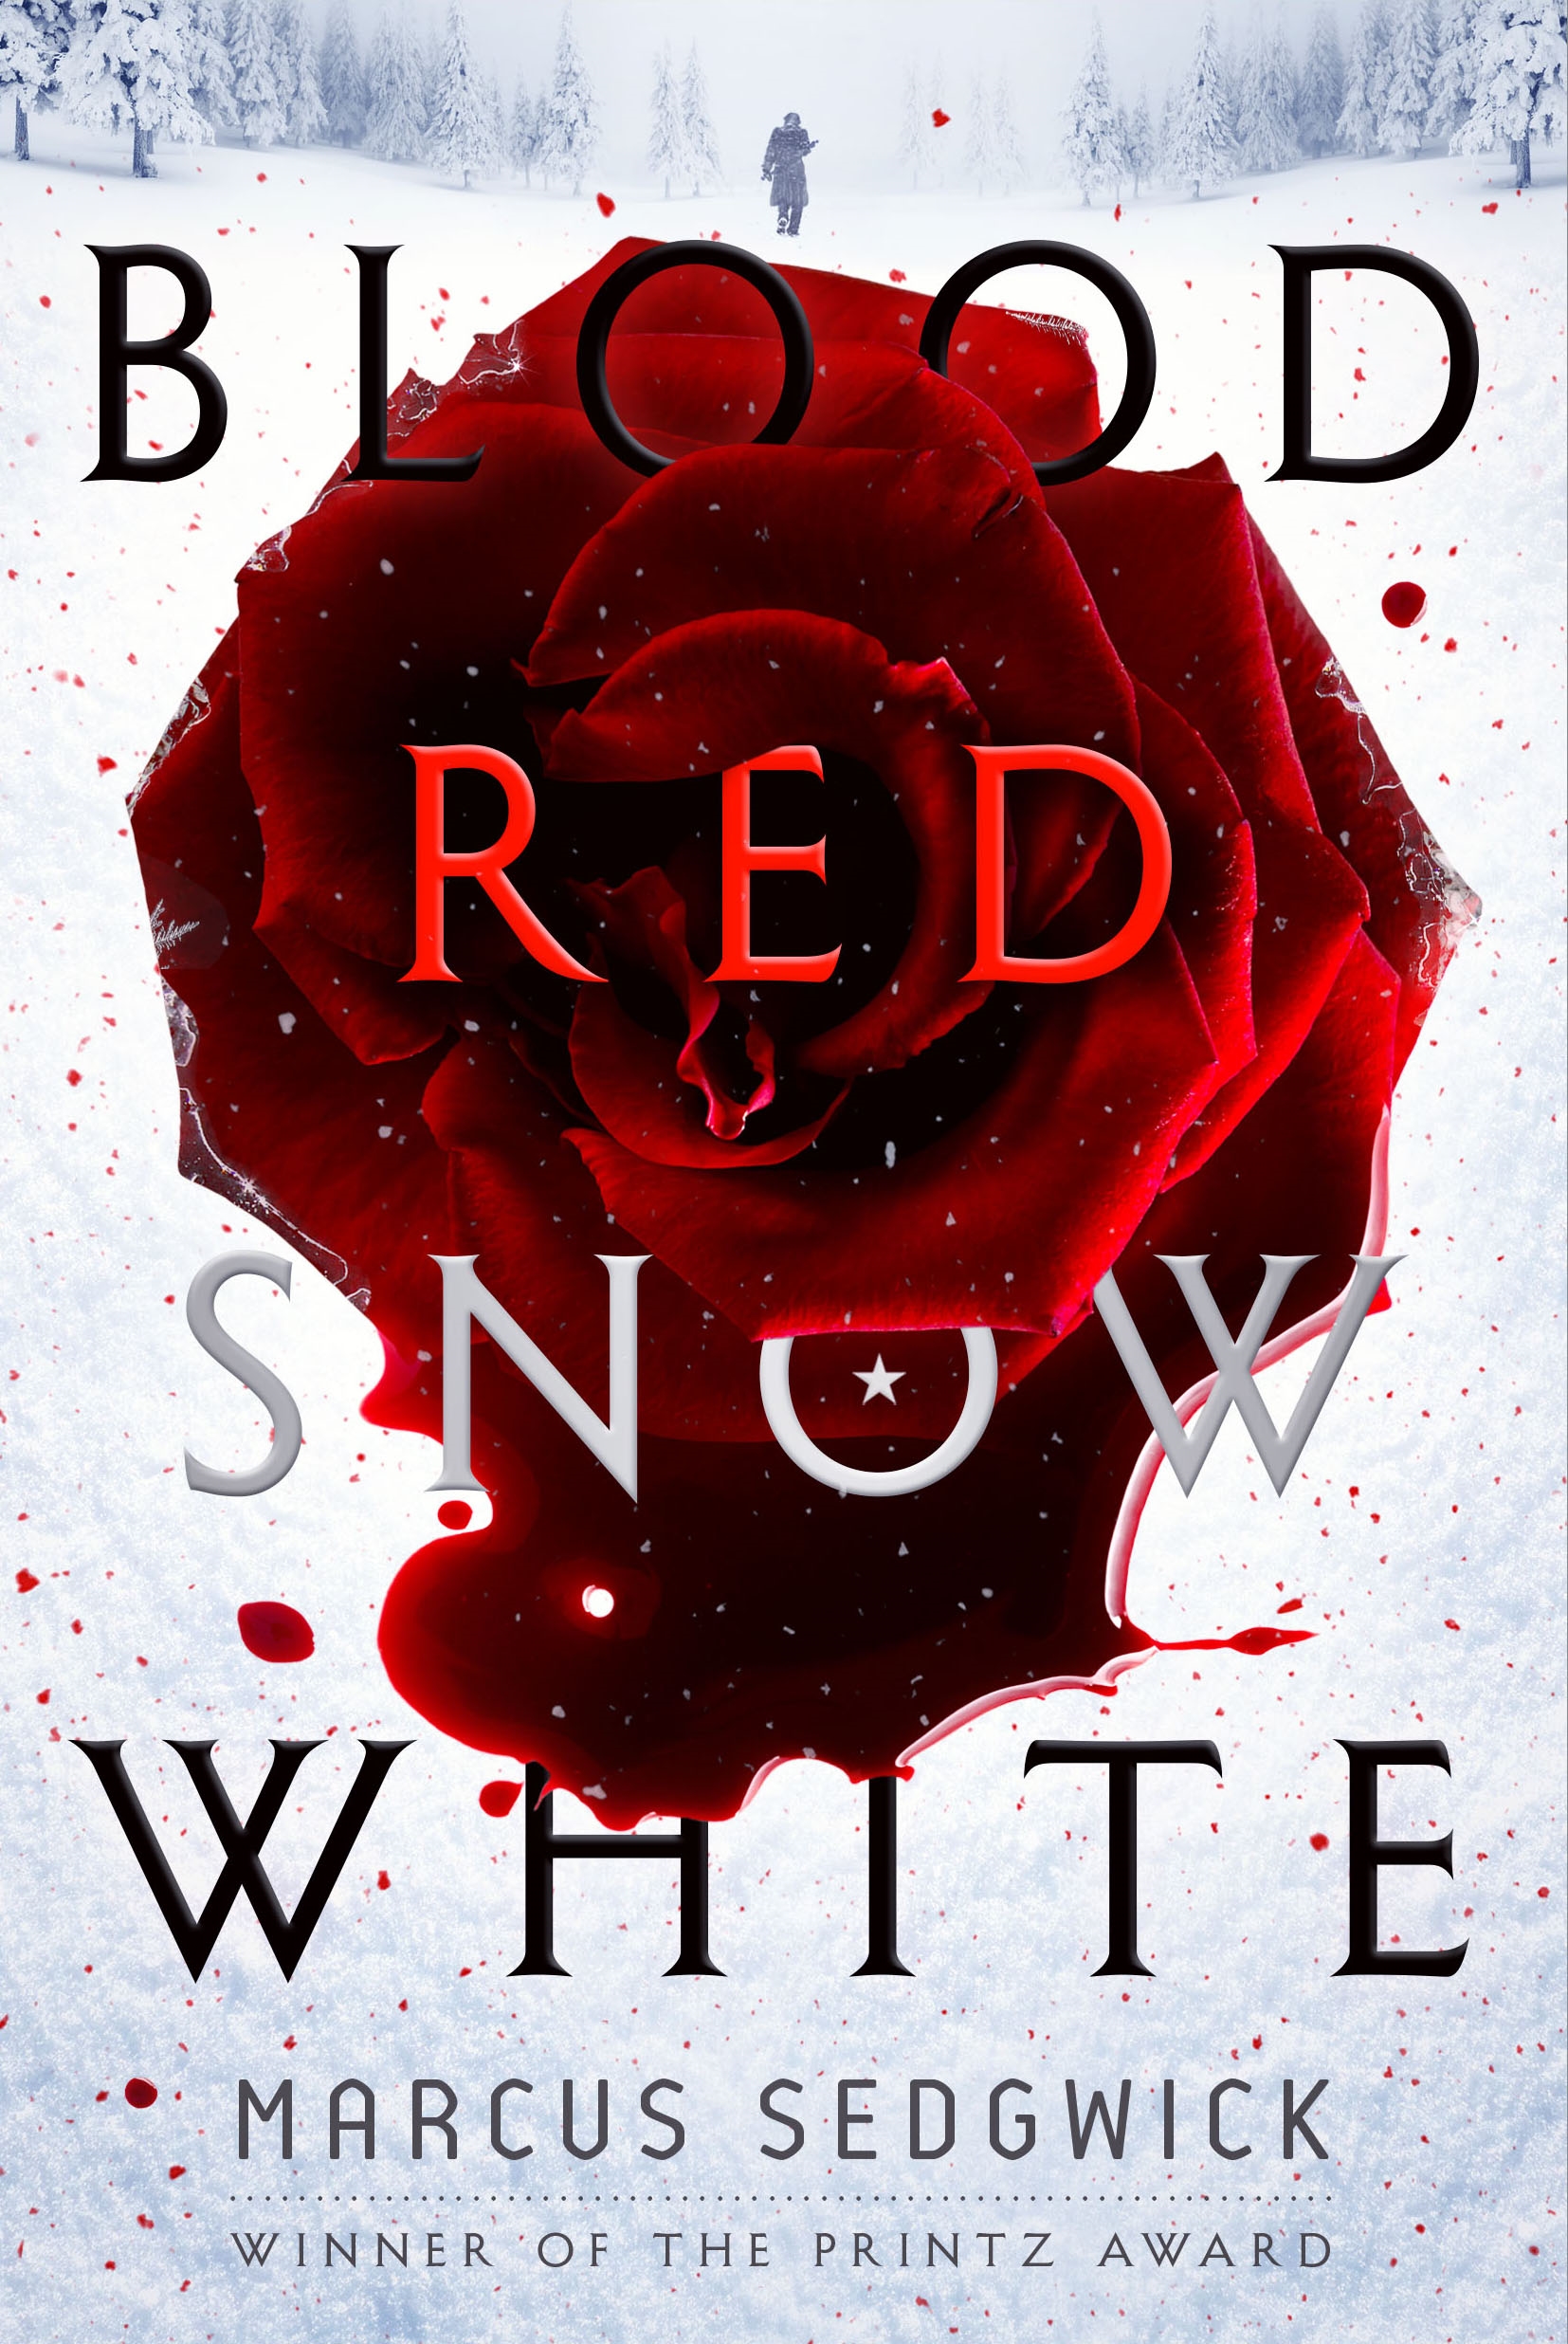 Blood Red Snow White